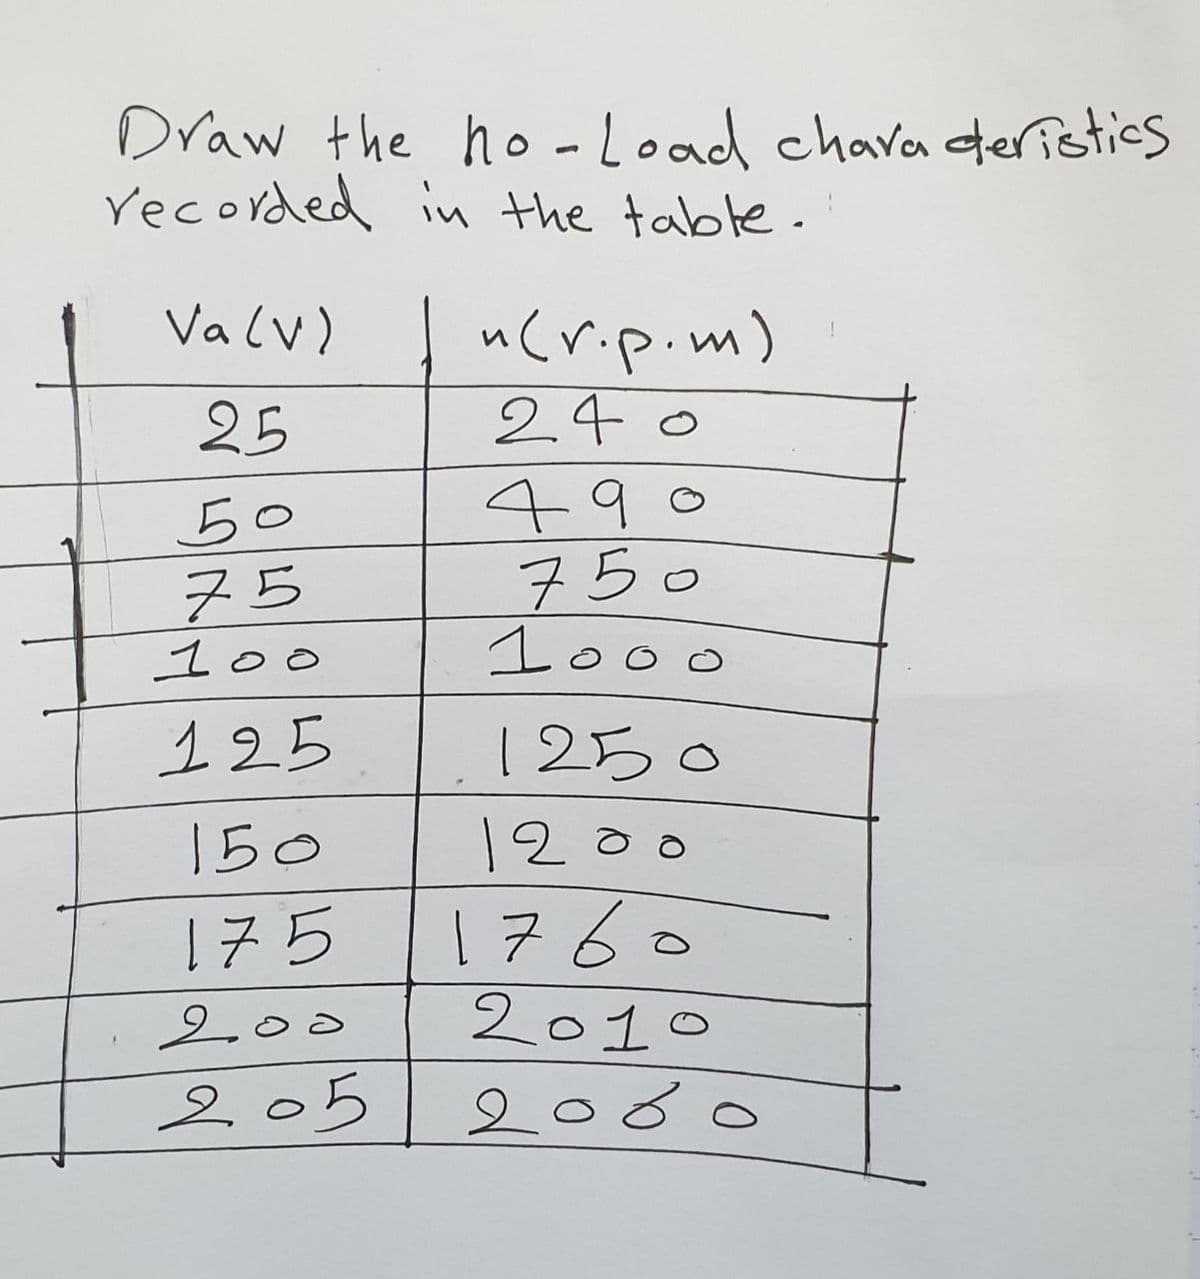 Draw the ho - Load chara dteristics
recorded in the table.
Valv)
n(r.p.m)
24o
25
50
75
100
490
750
1o00
125
1250
150
1200
1760
2010
2000
175
200
205
